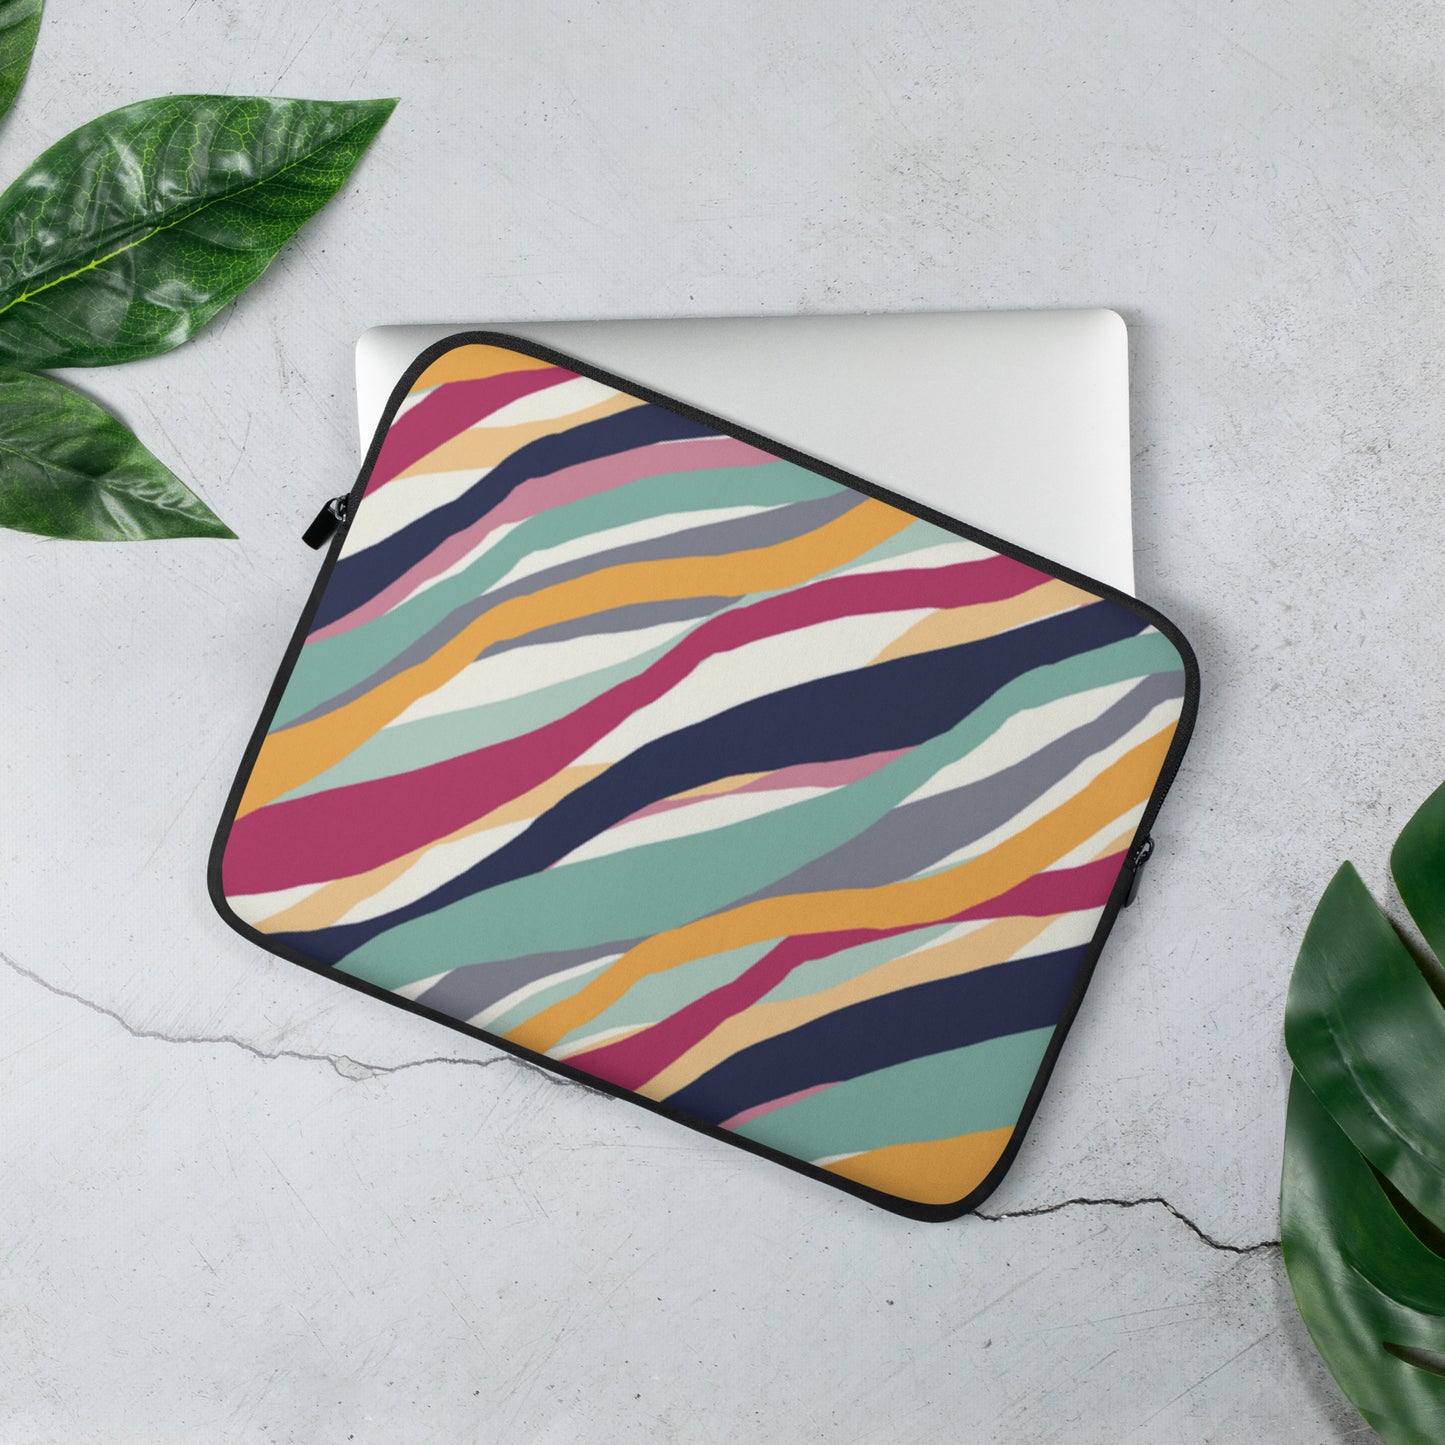 Laptop Sleeve Case - Abstract - Holiday Accent Ltd